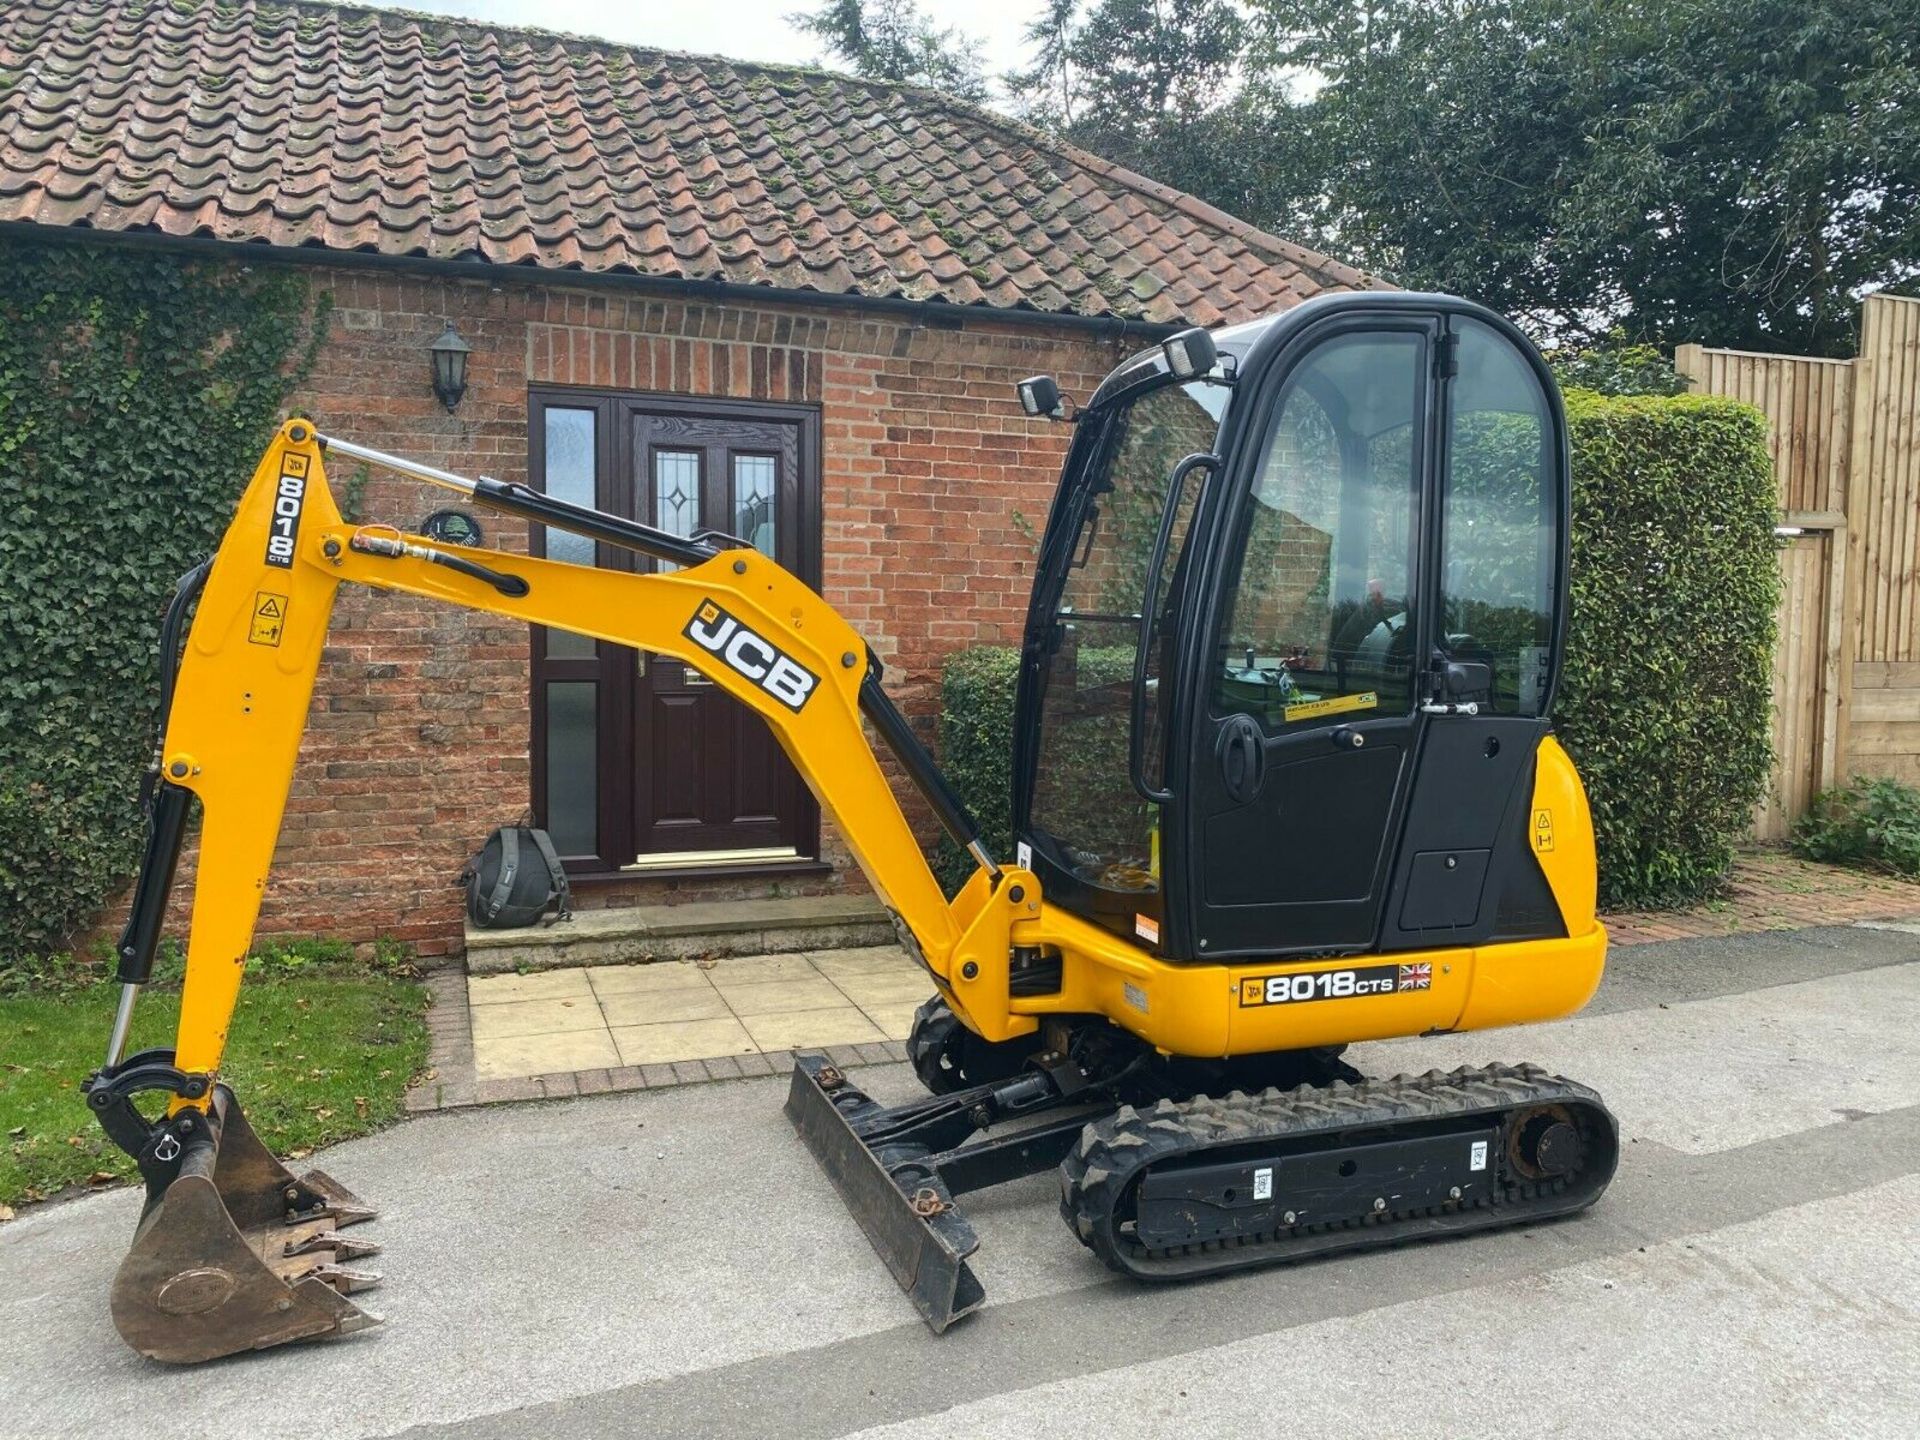 JCB MINI EXCAVATOR 8018 CTS, ONLY 236 HOURS FROM NEW, FULL CAB, 1 OWNER GENUINE *PLUS VAT*